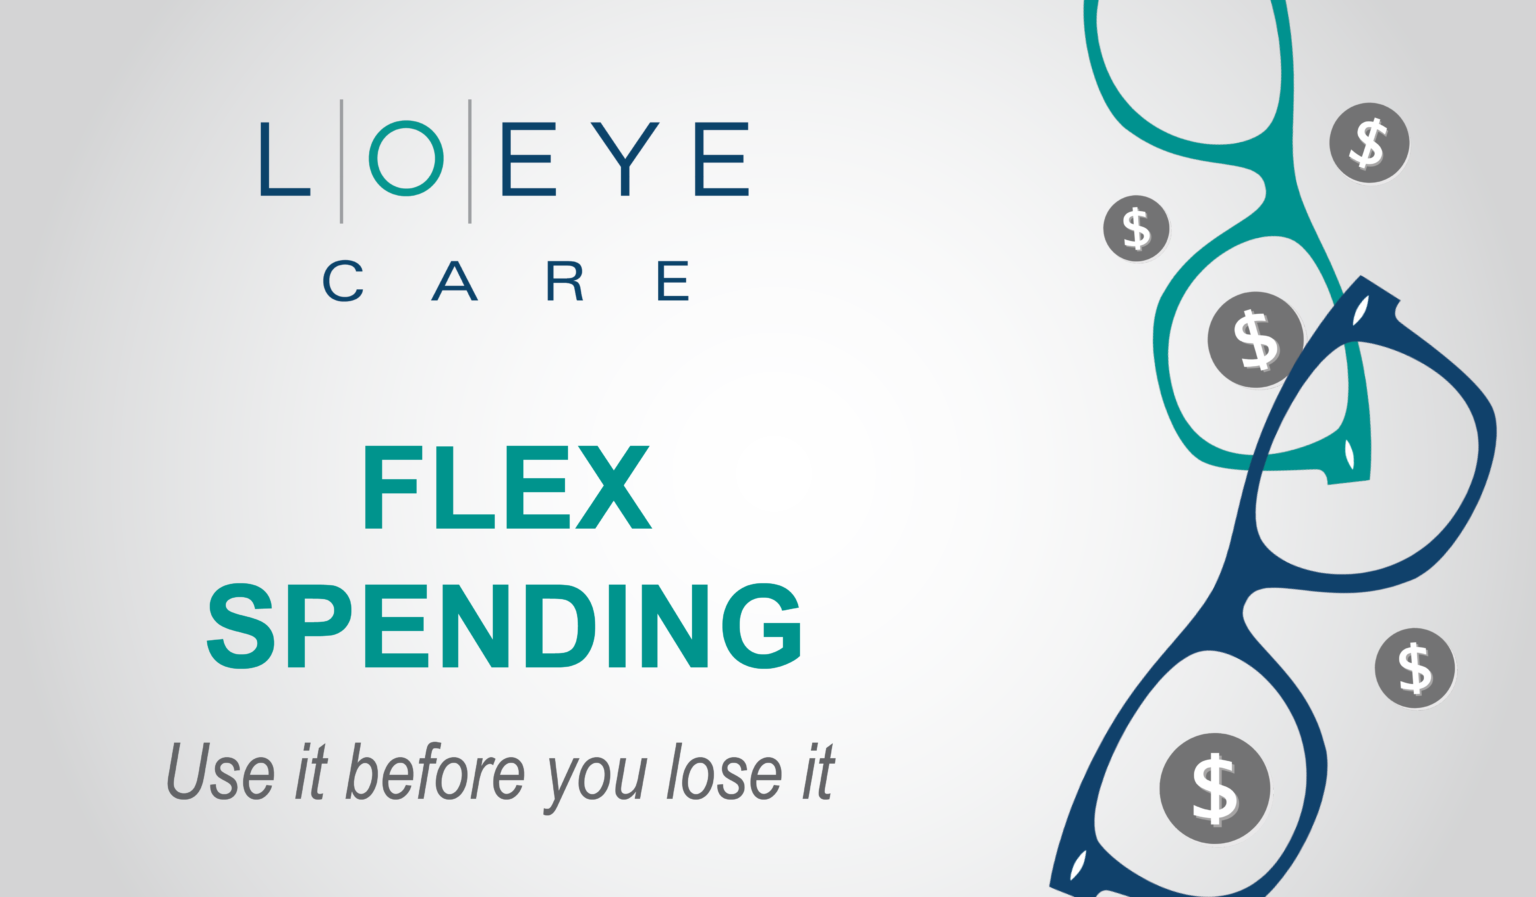 Use your Flex spending dollars before you lose it! LO Eye Care